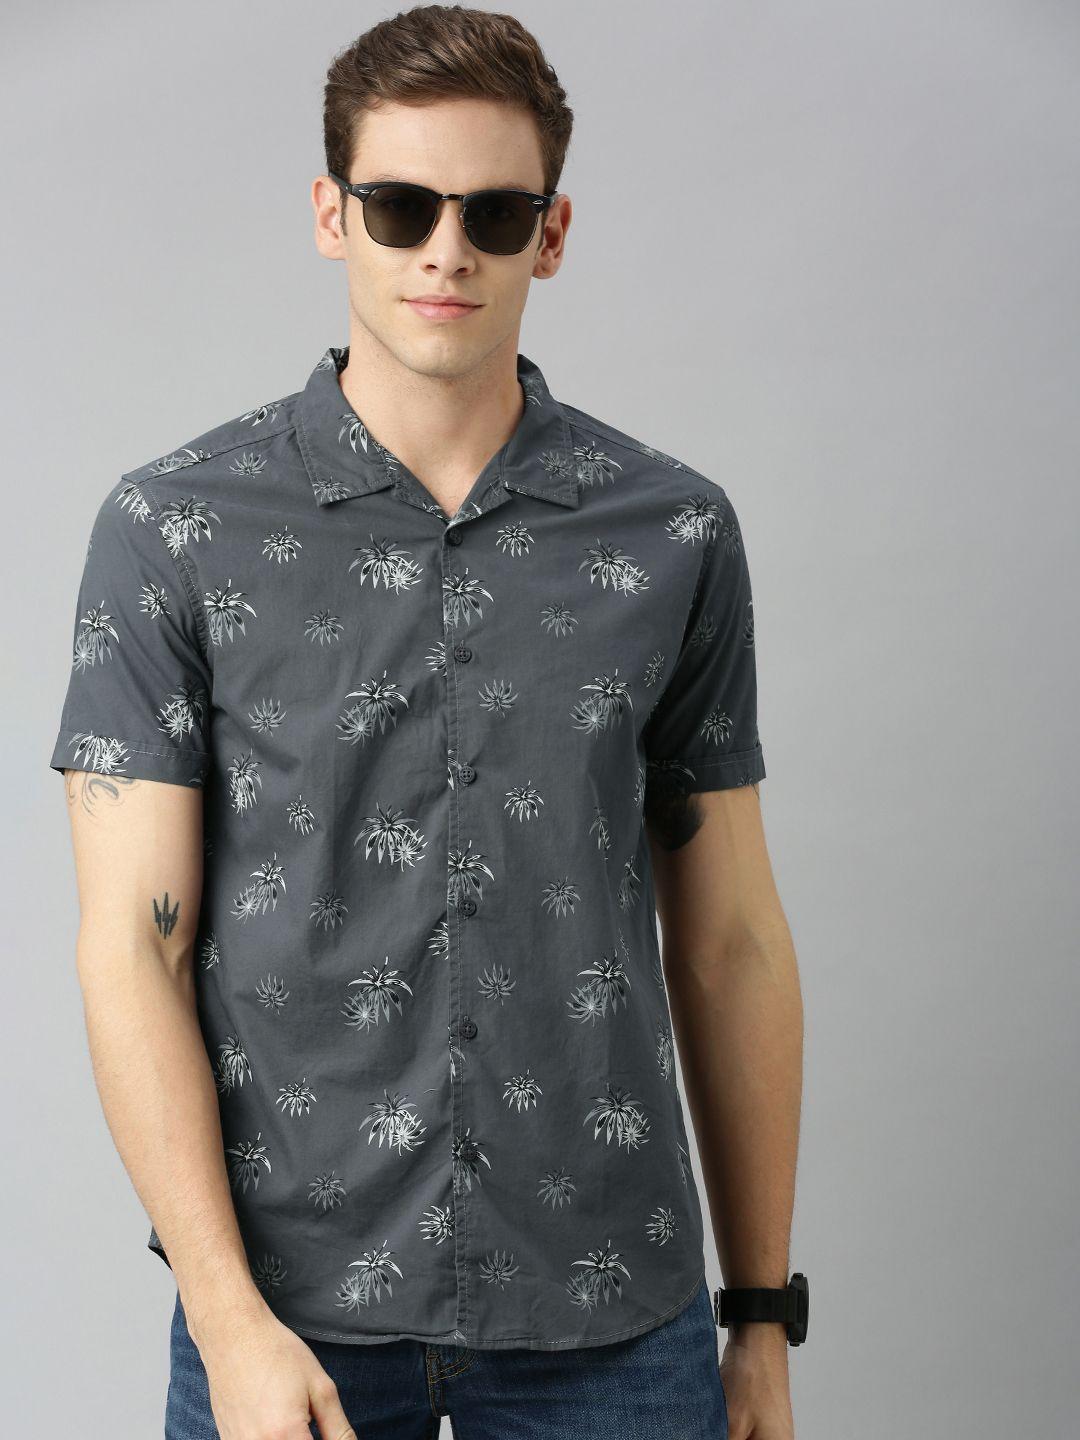 here&now men grey & white slim fit floral printed cuban collar casual shirt